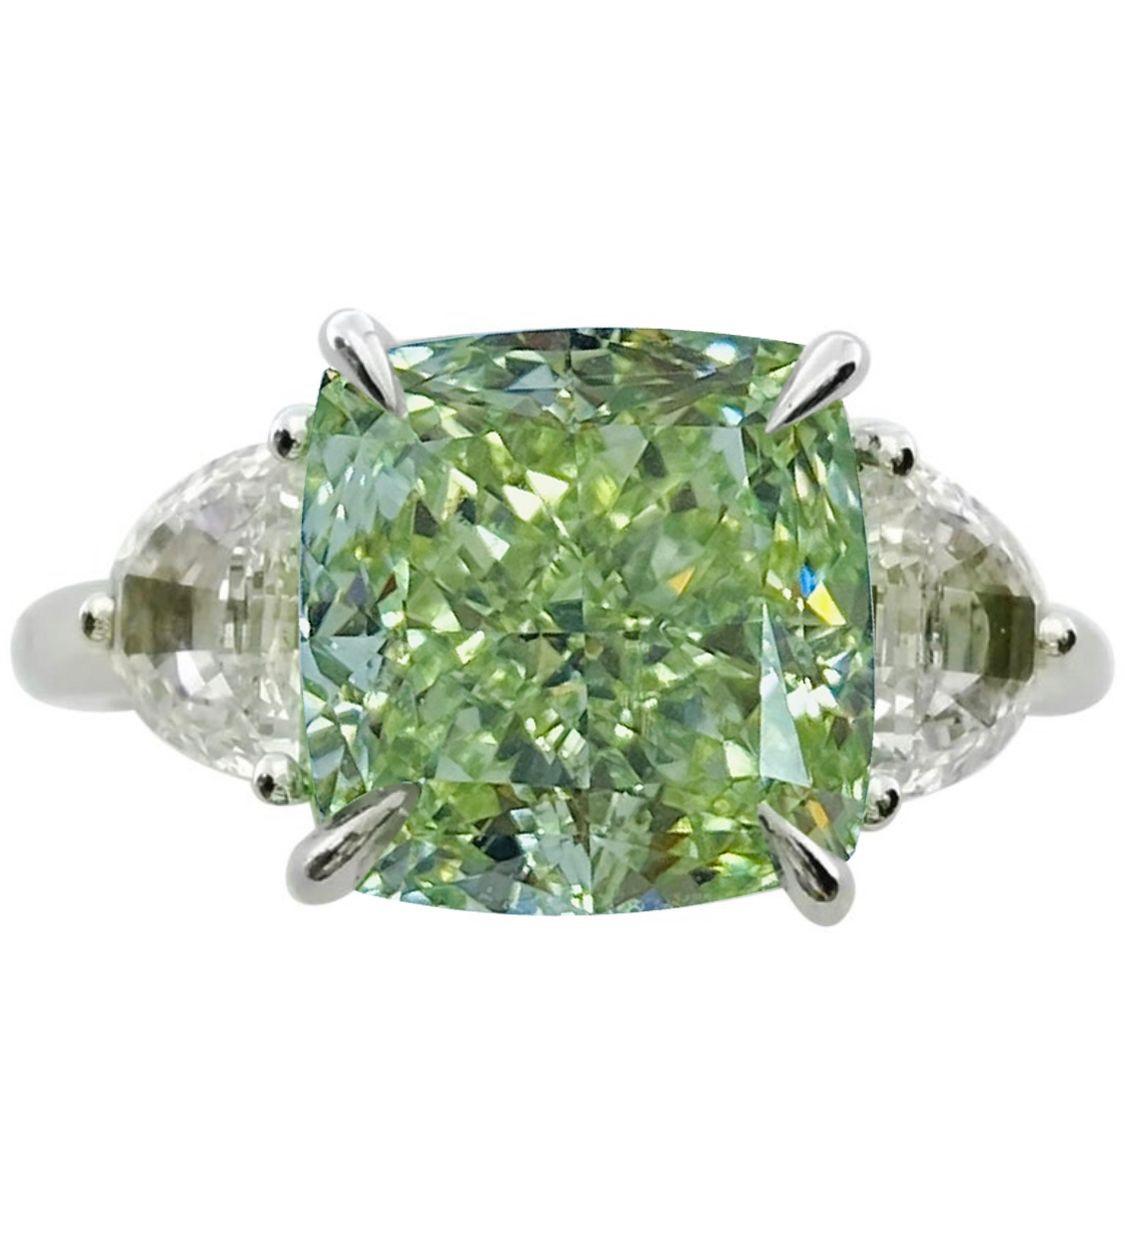 From the museum vault at Emilio Jewelry New York,

An ultra rare center stone weighing 4.04 carats certified by Gia as Fancy green with yellow overtone. Please inquire for more information. Set in Platinum. 
Emilio Jewelry specializes in Natural